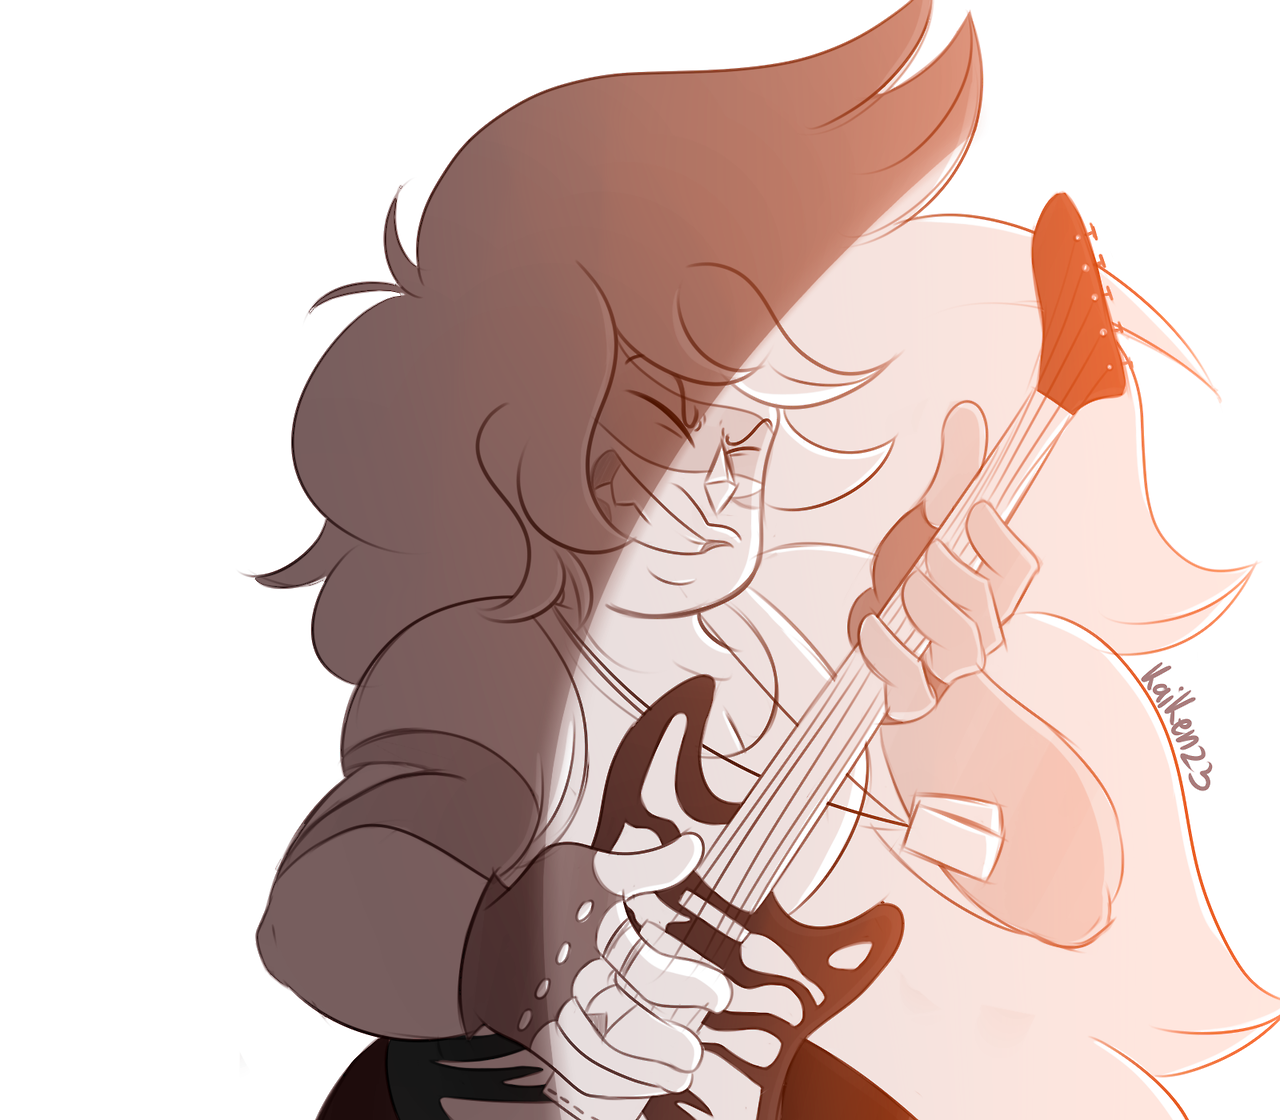 Here’s Jasper with a striped electric guitar because why not Rebecca,please bring her backk !